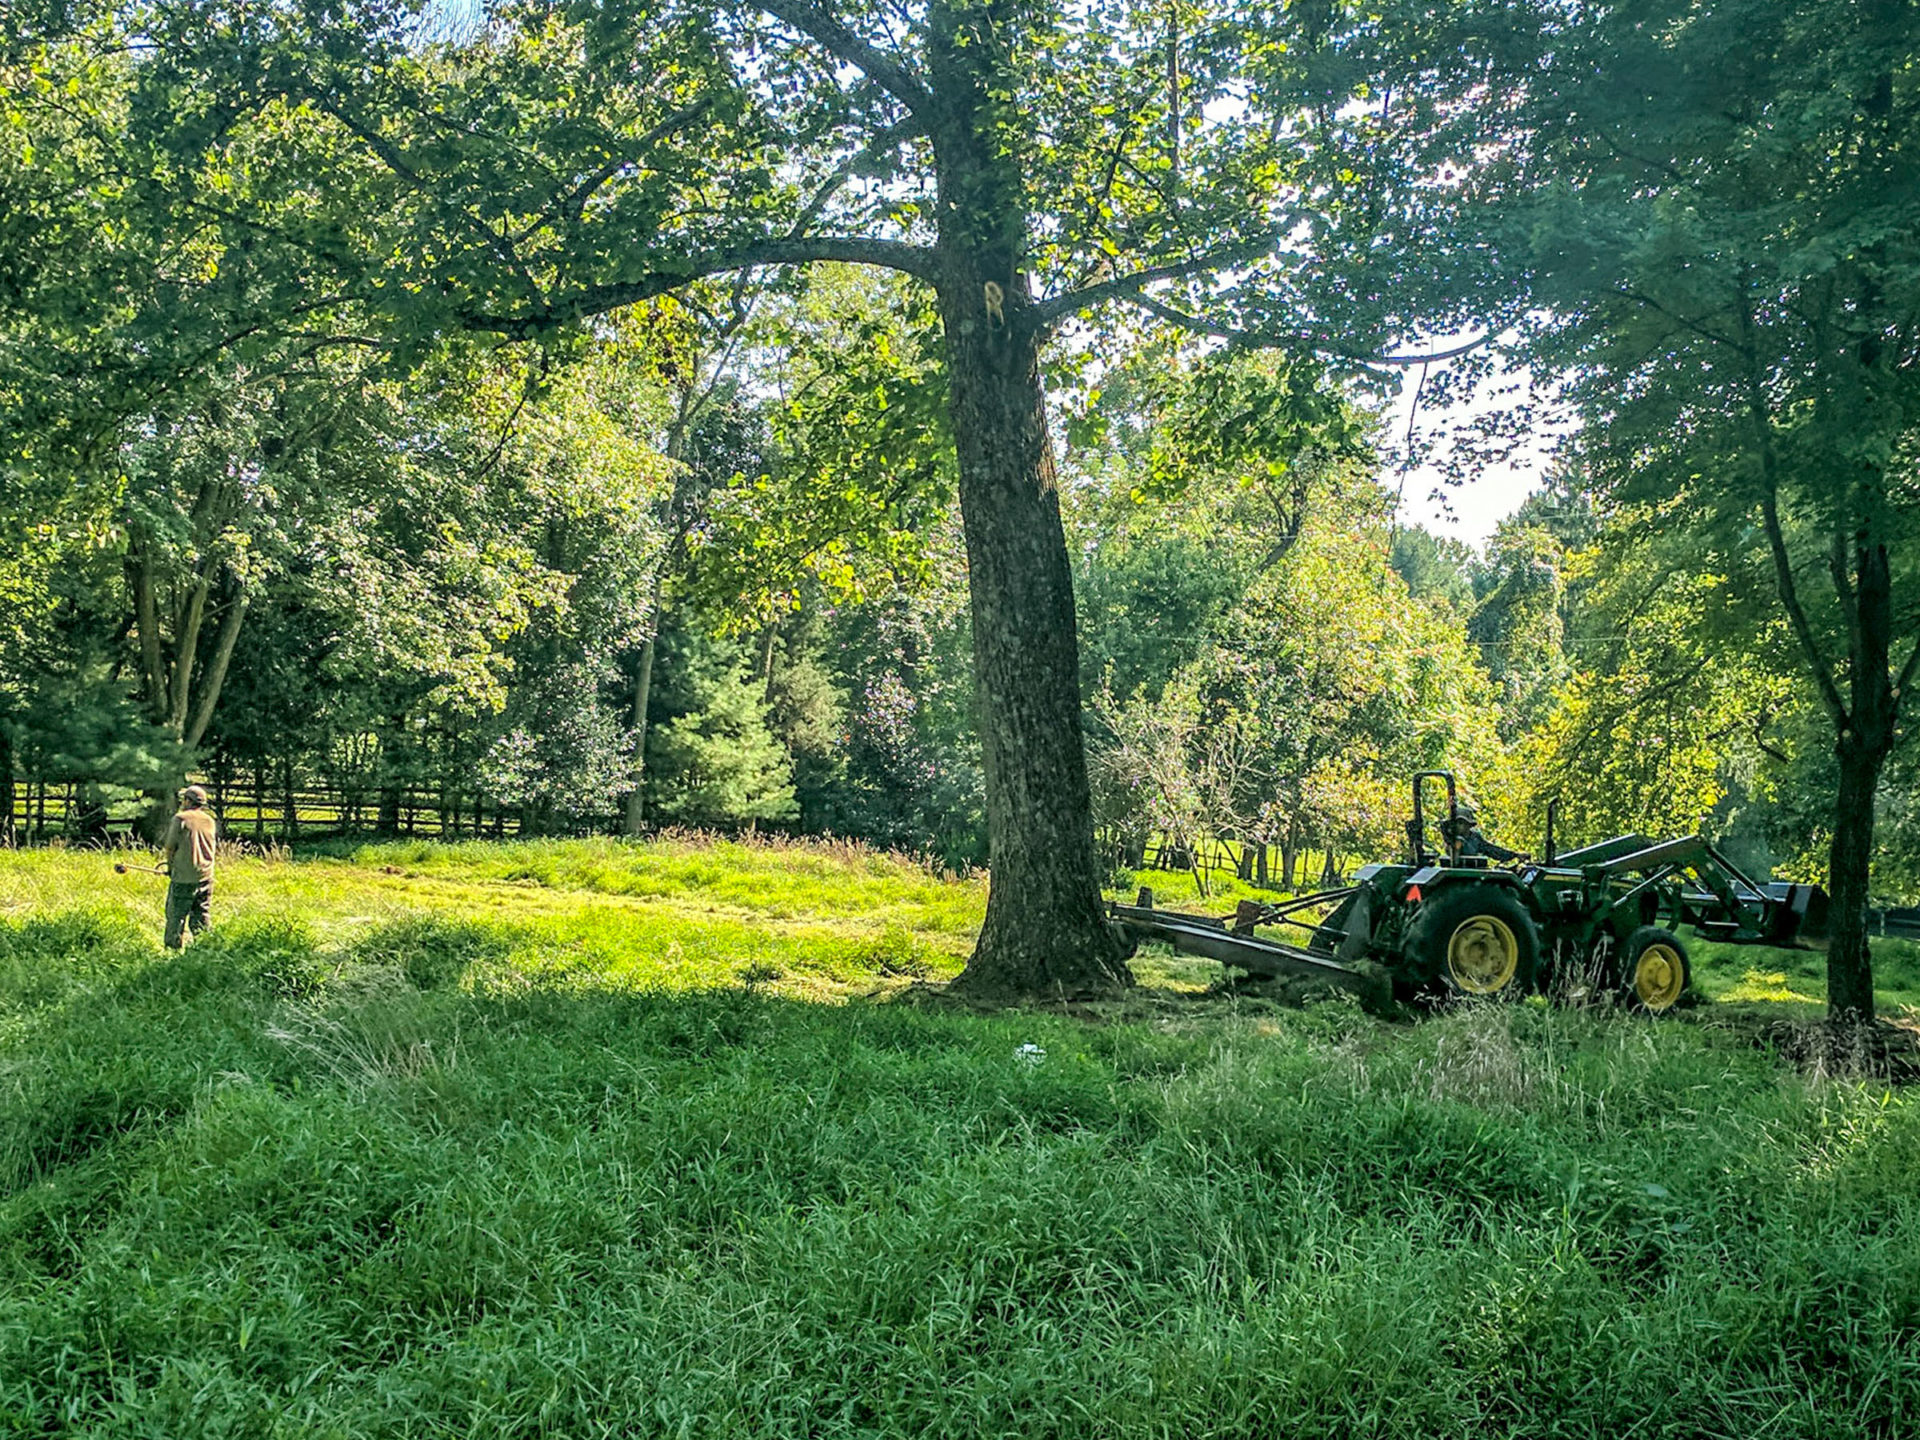 A plot of land with green grass, trees, and a tractor on the side.